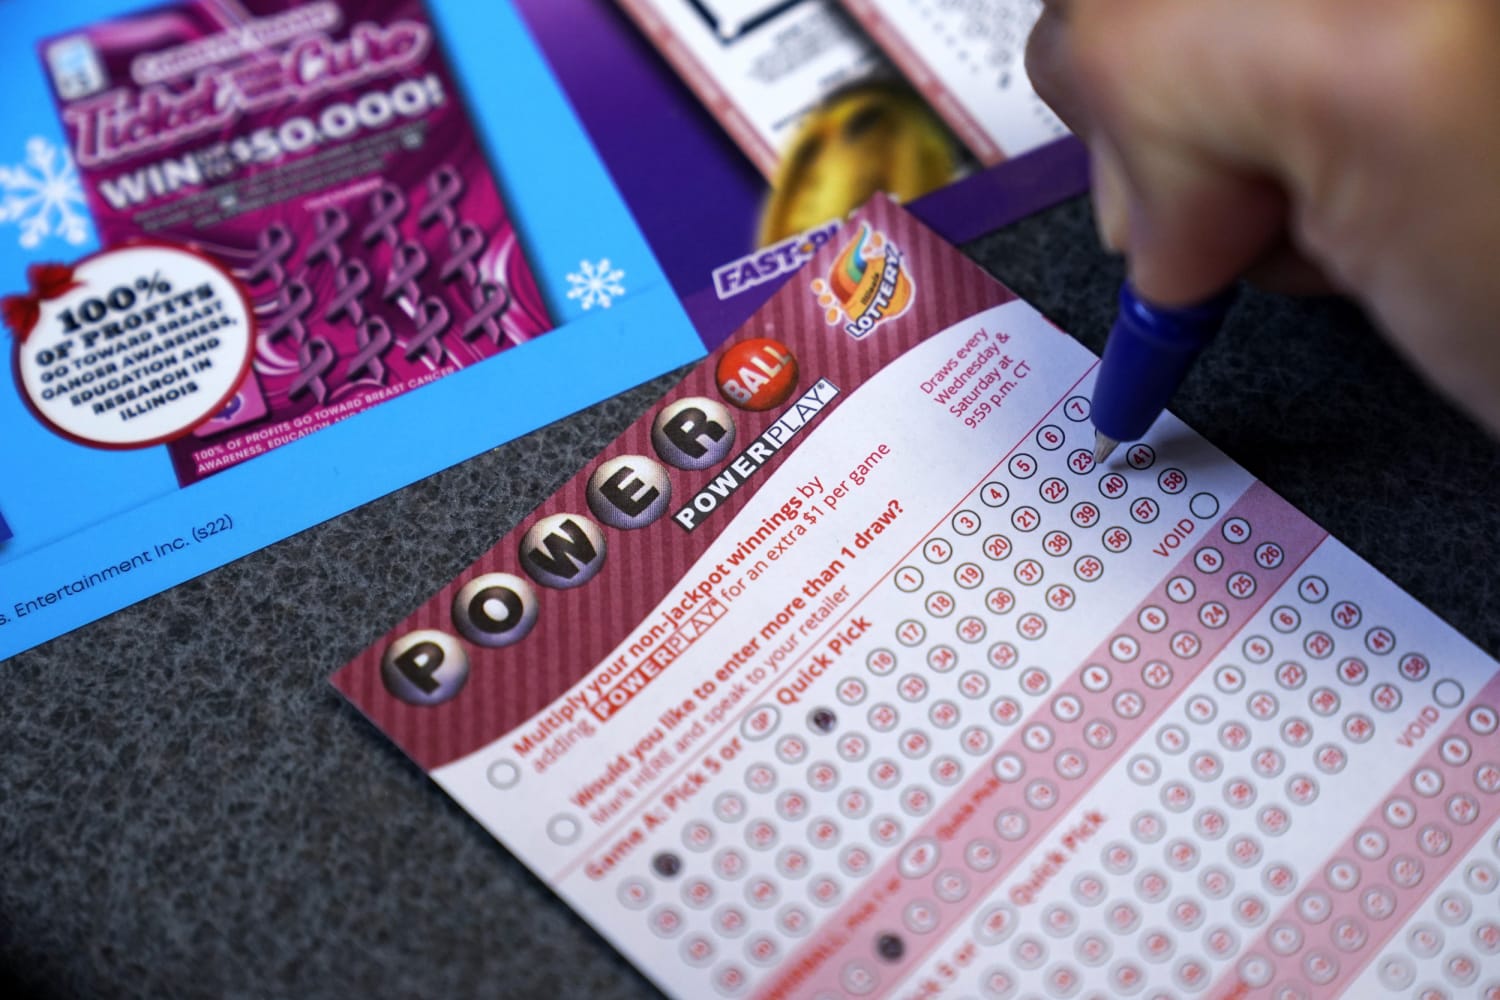 Here's what you need to do if you win the $760 million Powerball prize